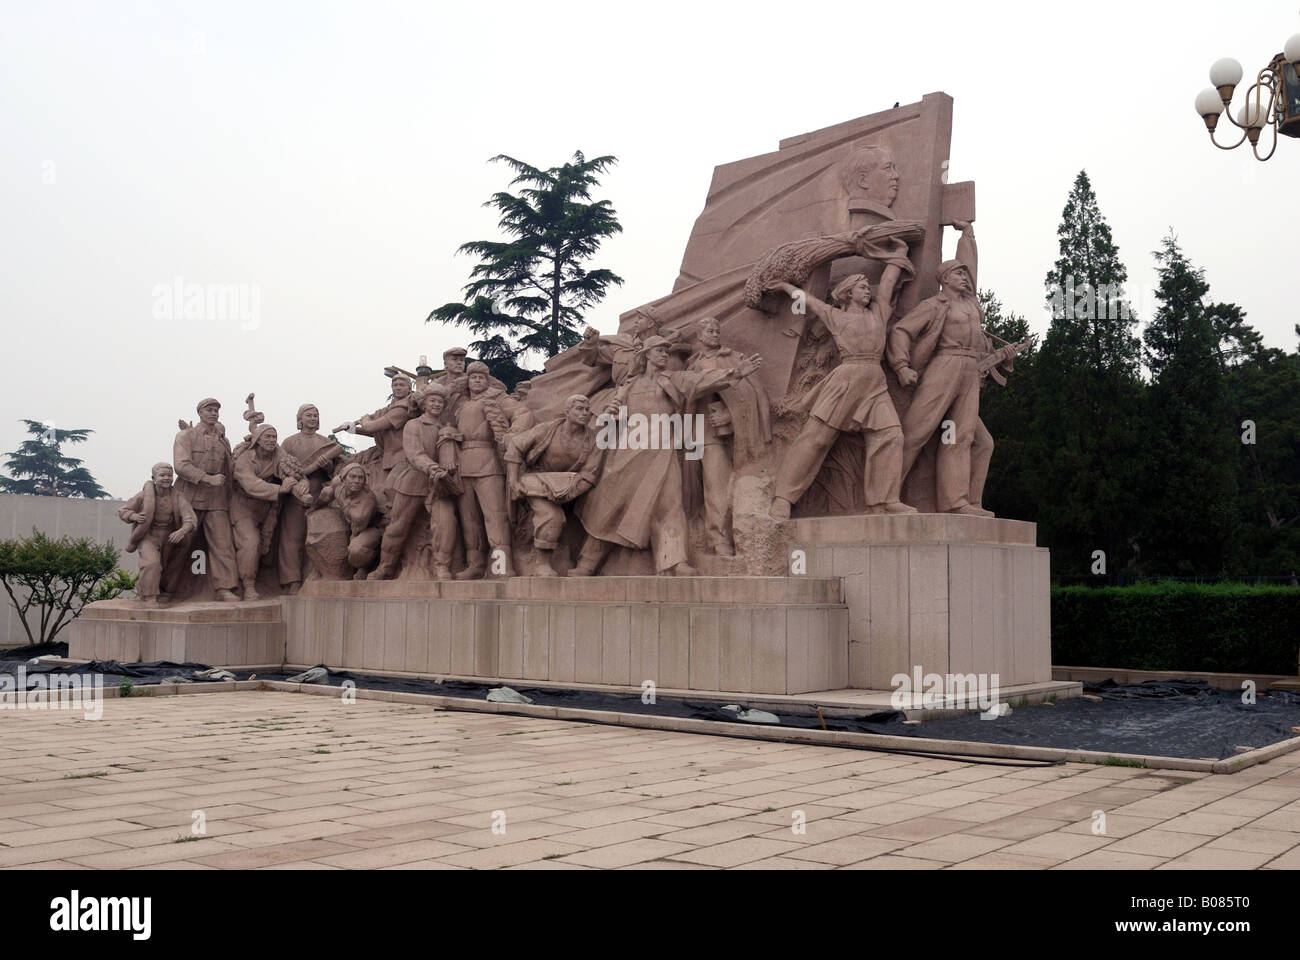 One of the sculptures outside the front of Chairman Mao s mausoleum Tiananmen Square China Asia Beijing Peking City Chairman Mao Stock Photo